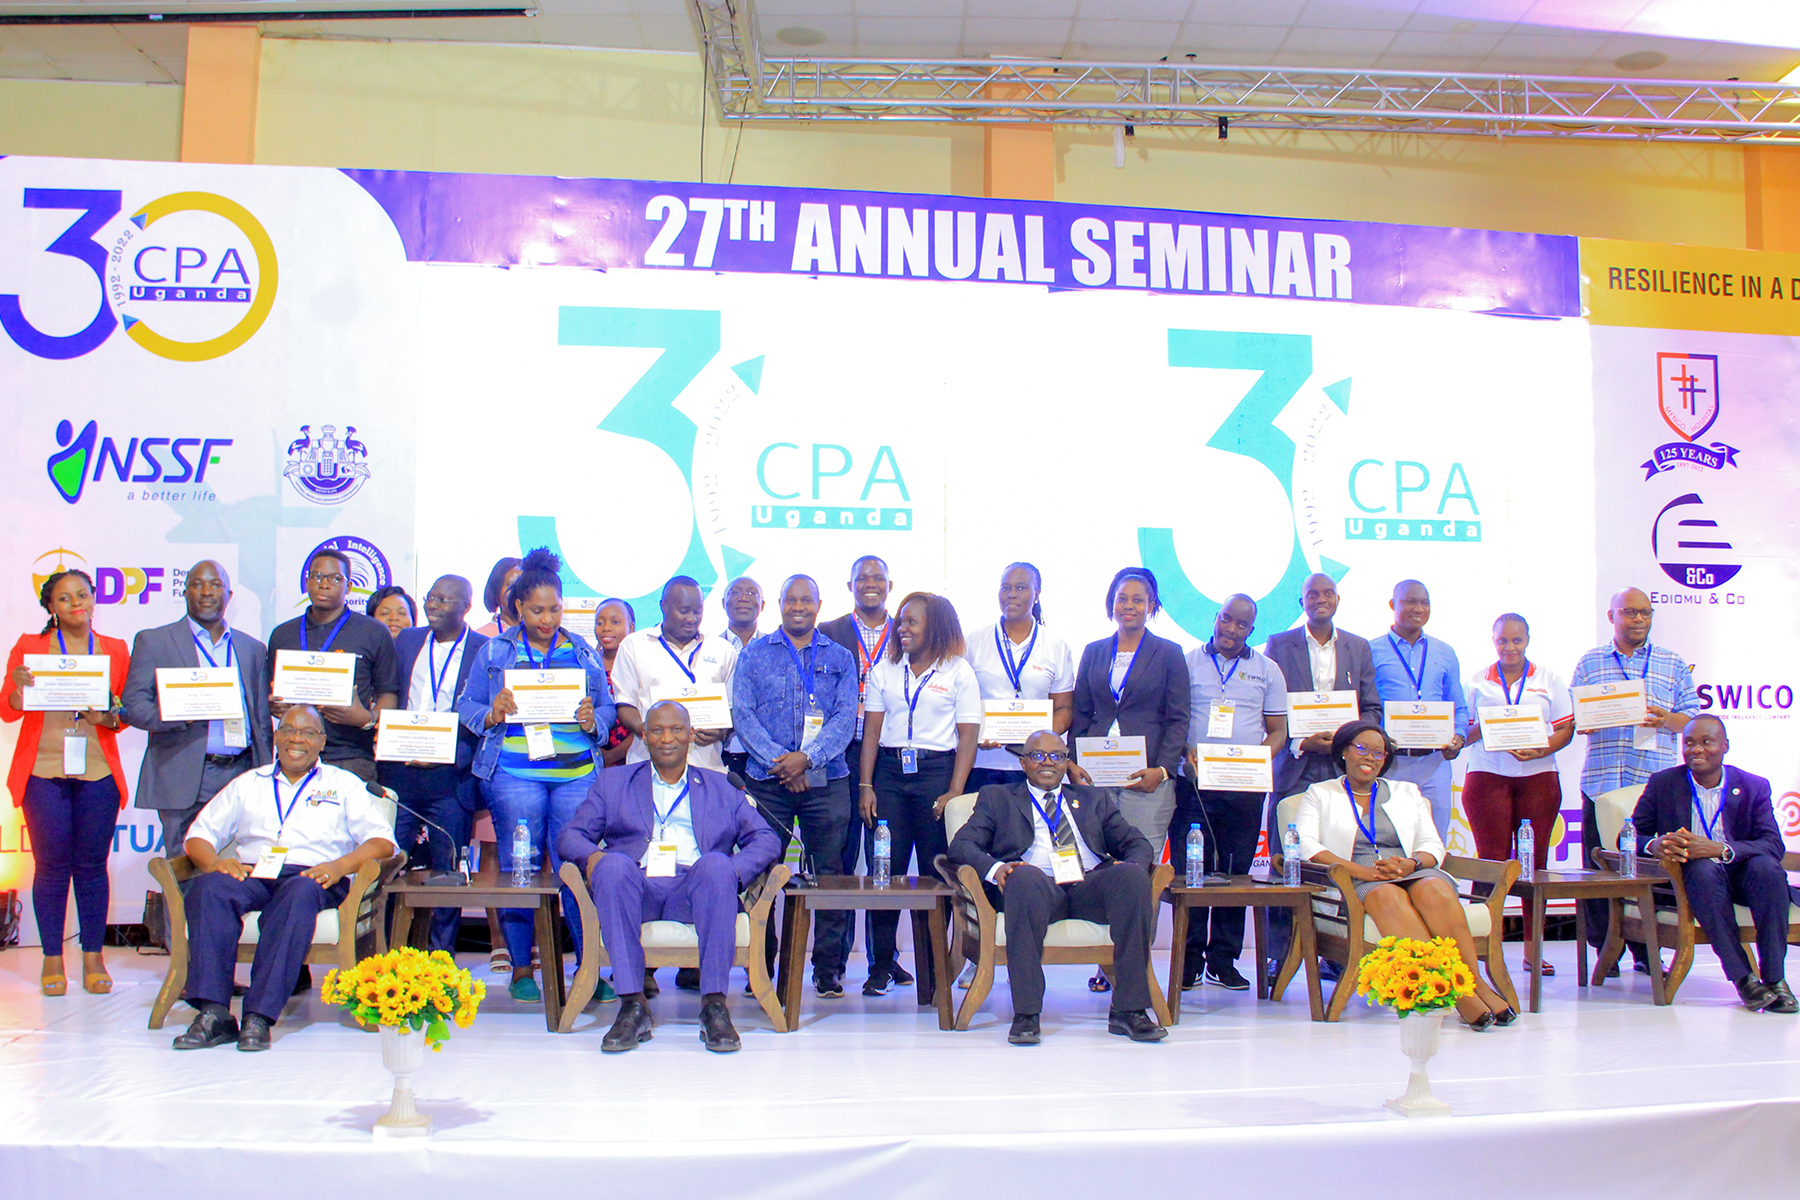 Some of the participants pose for a photo at the 27th ICPAU Annual Seminar